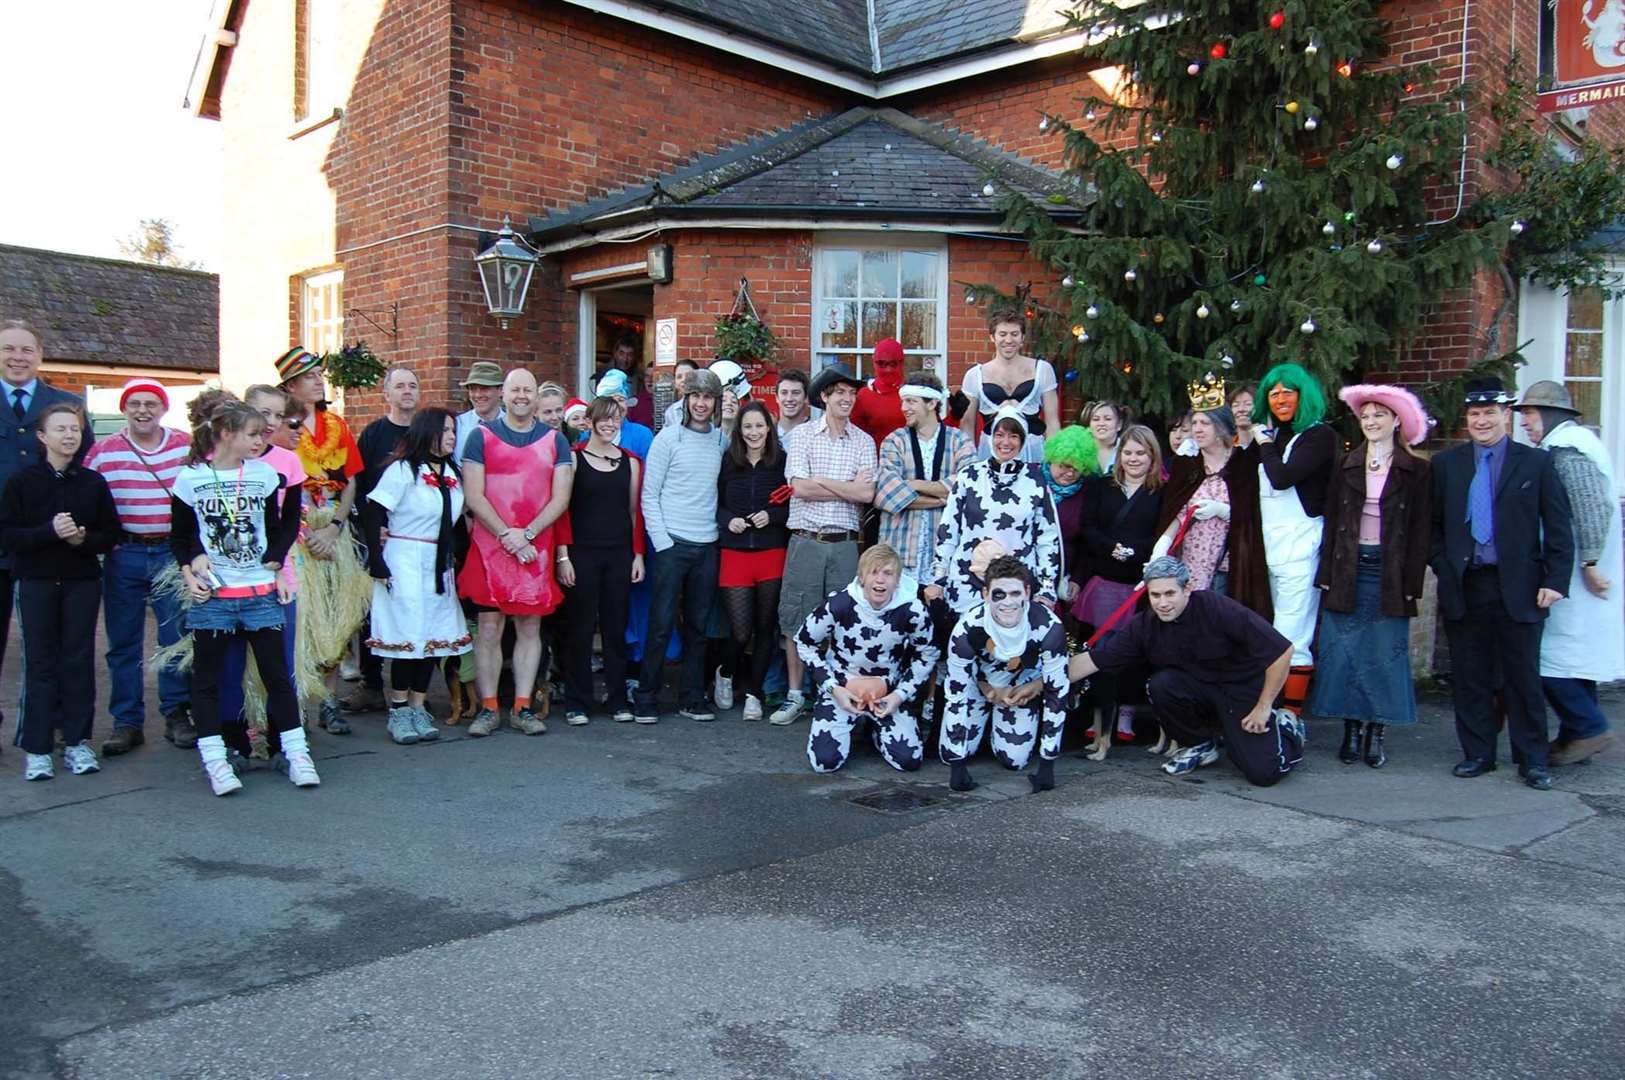 Participants in the Great Valley Run outside the Mermaid Inn in Bishopsbourne, Canterbury, in January 2008. The pub, dating back to the 1860s, is still going today. Picture: James White